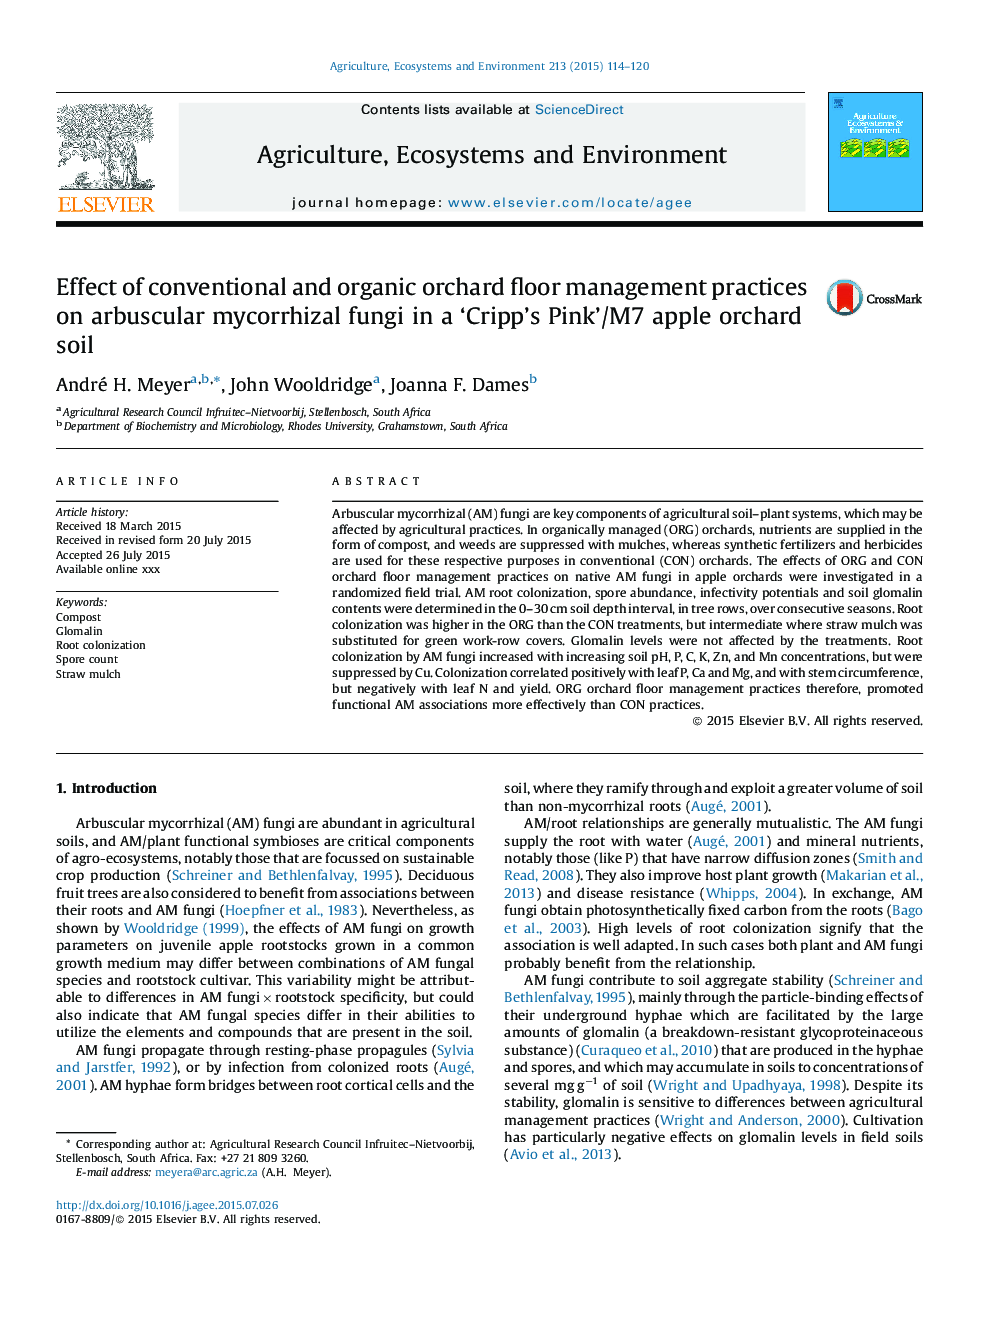 Effect of conventional and organic orchard floor management practices on arbuscular mycorrhizal fungi in a 'Cripp's Pink'/M7 apple orchard soil